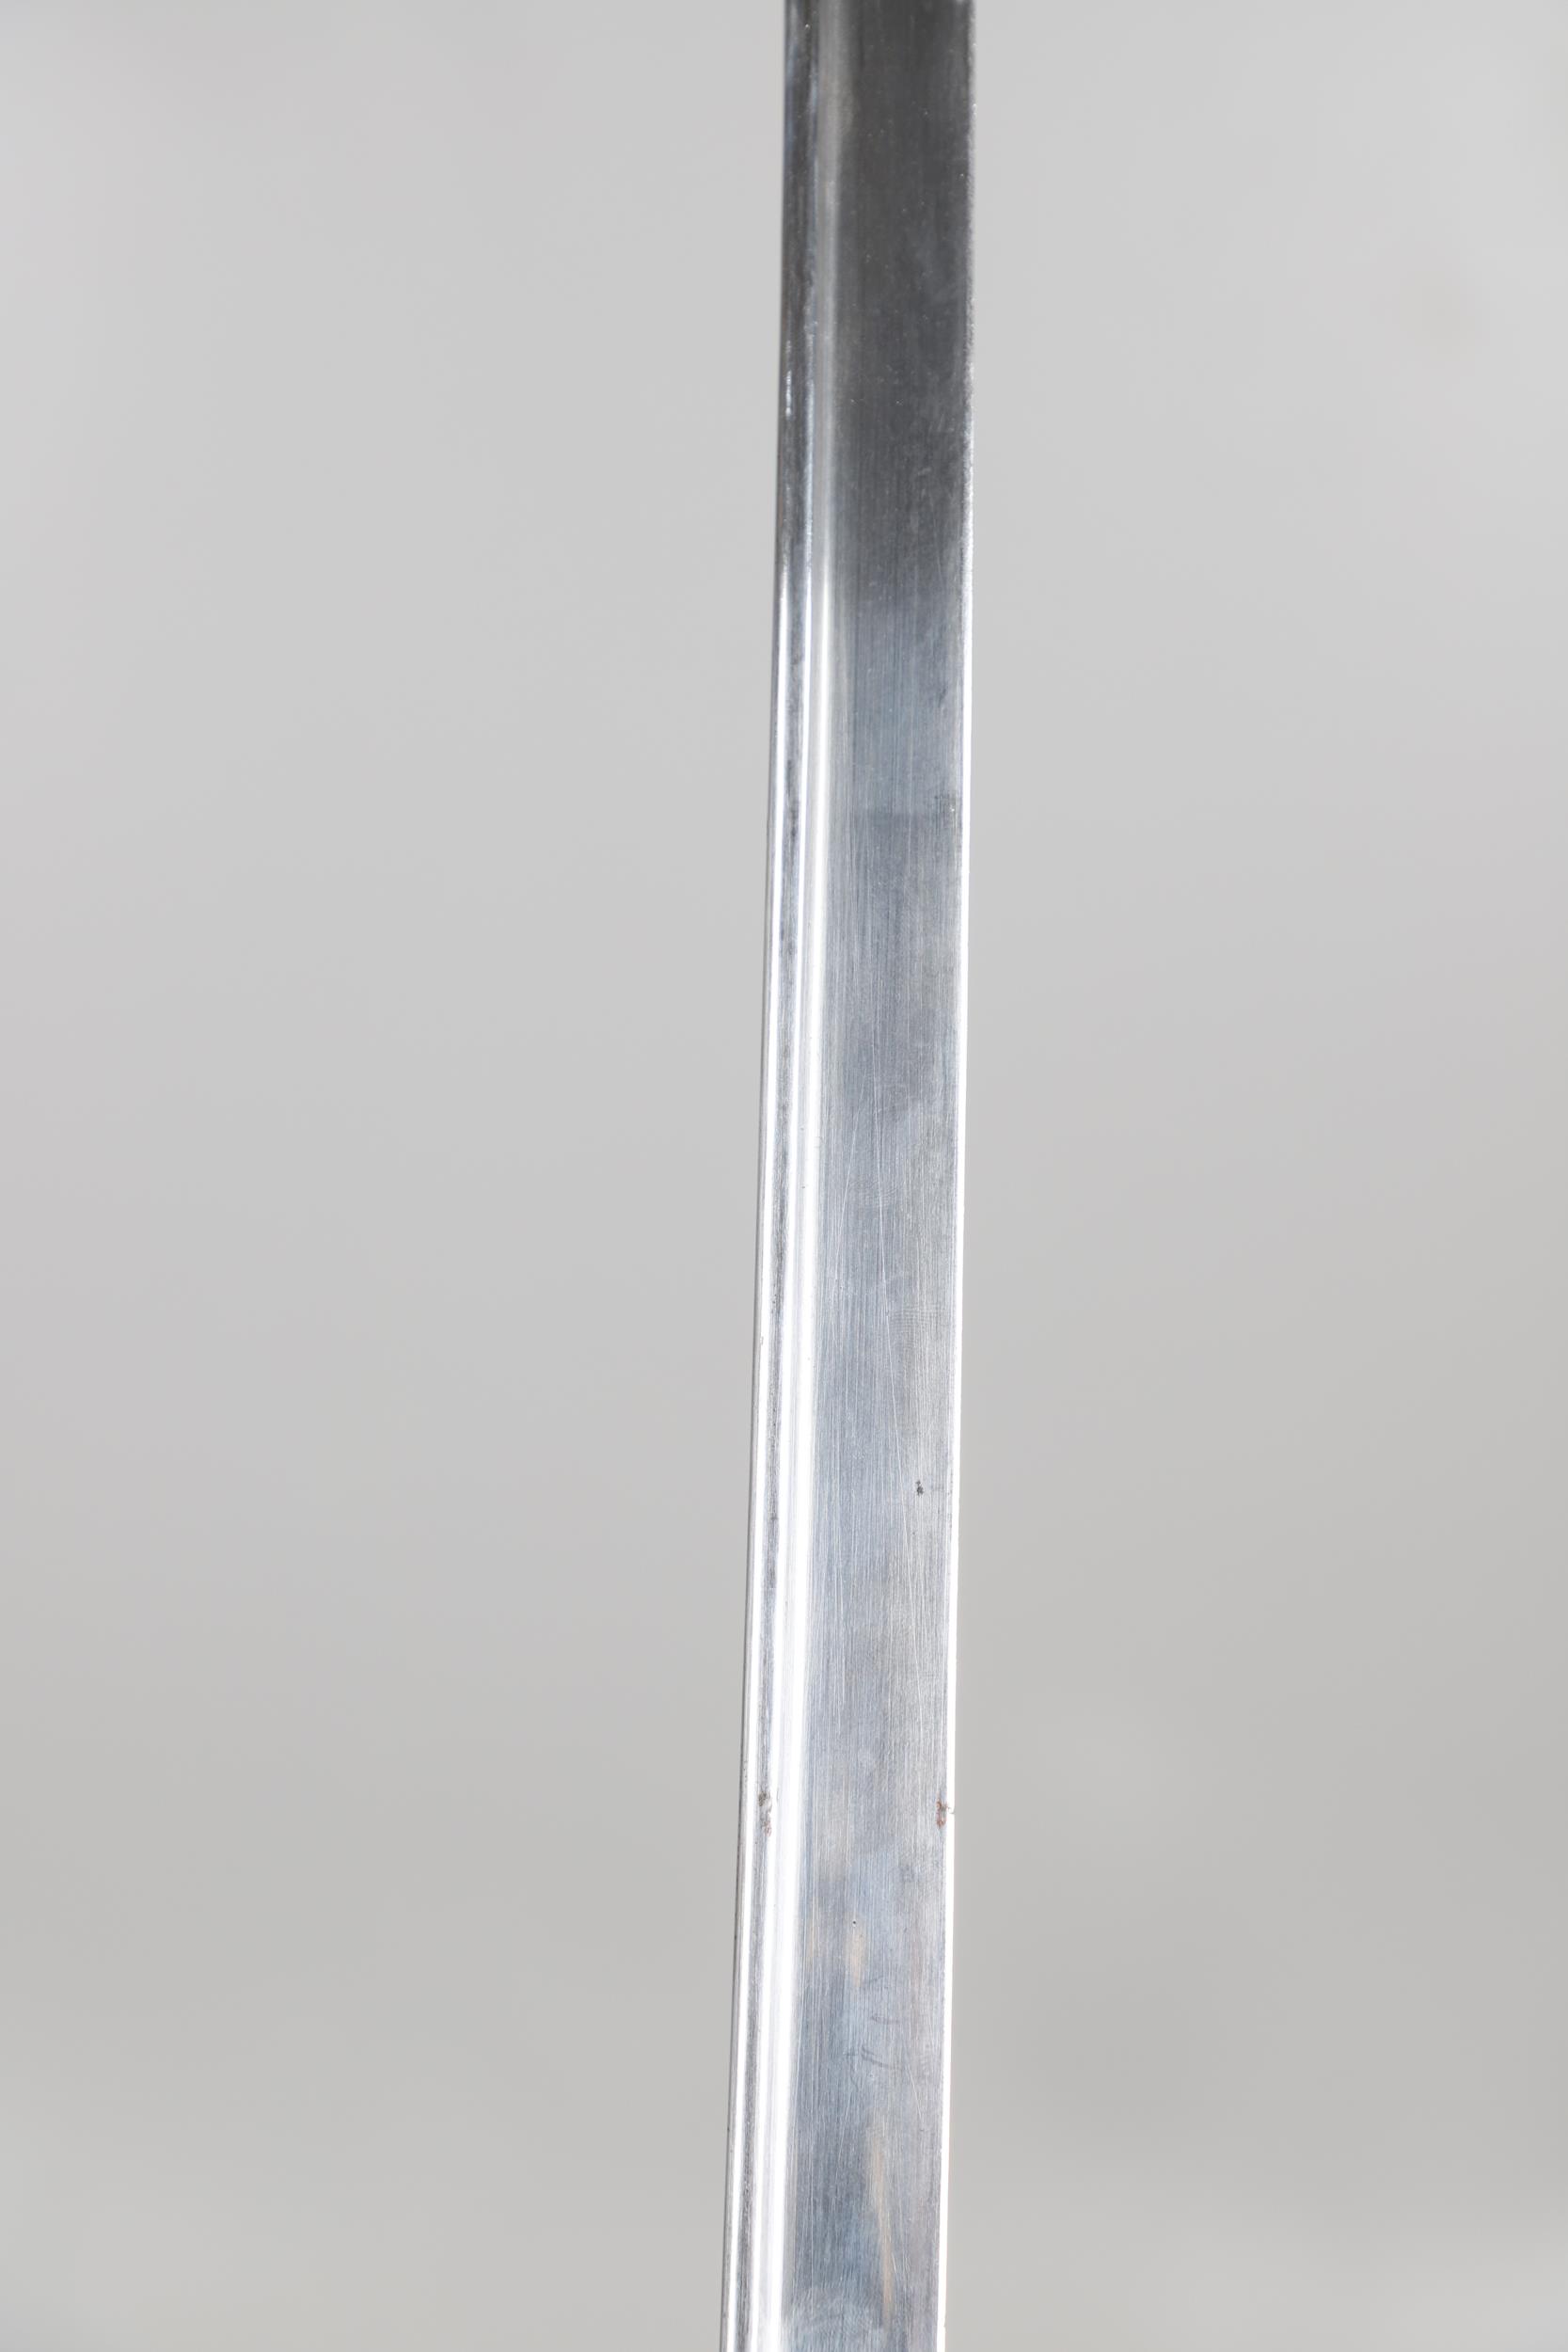 A GEORGE IV 1822 PATTERN HEAVY CAVALRY PATTERN SWORD BY ANDREWS OF PALL MALL. - Image 6 of 12